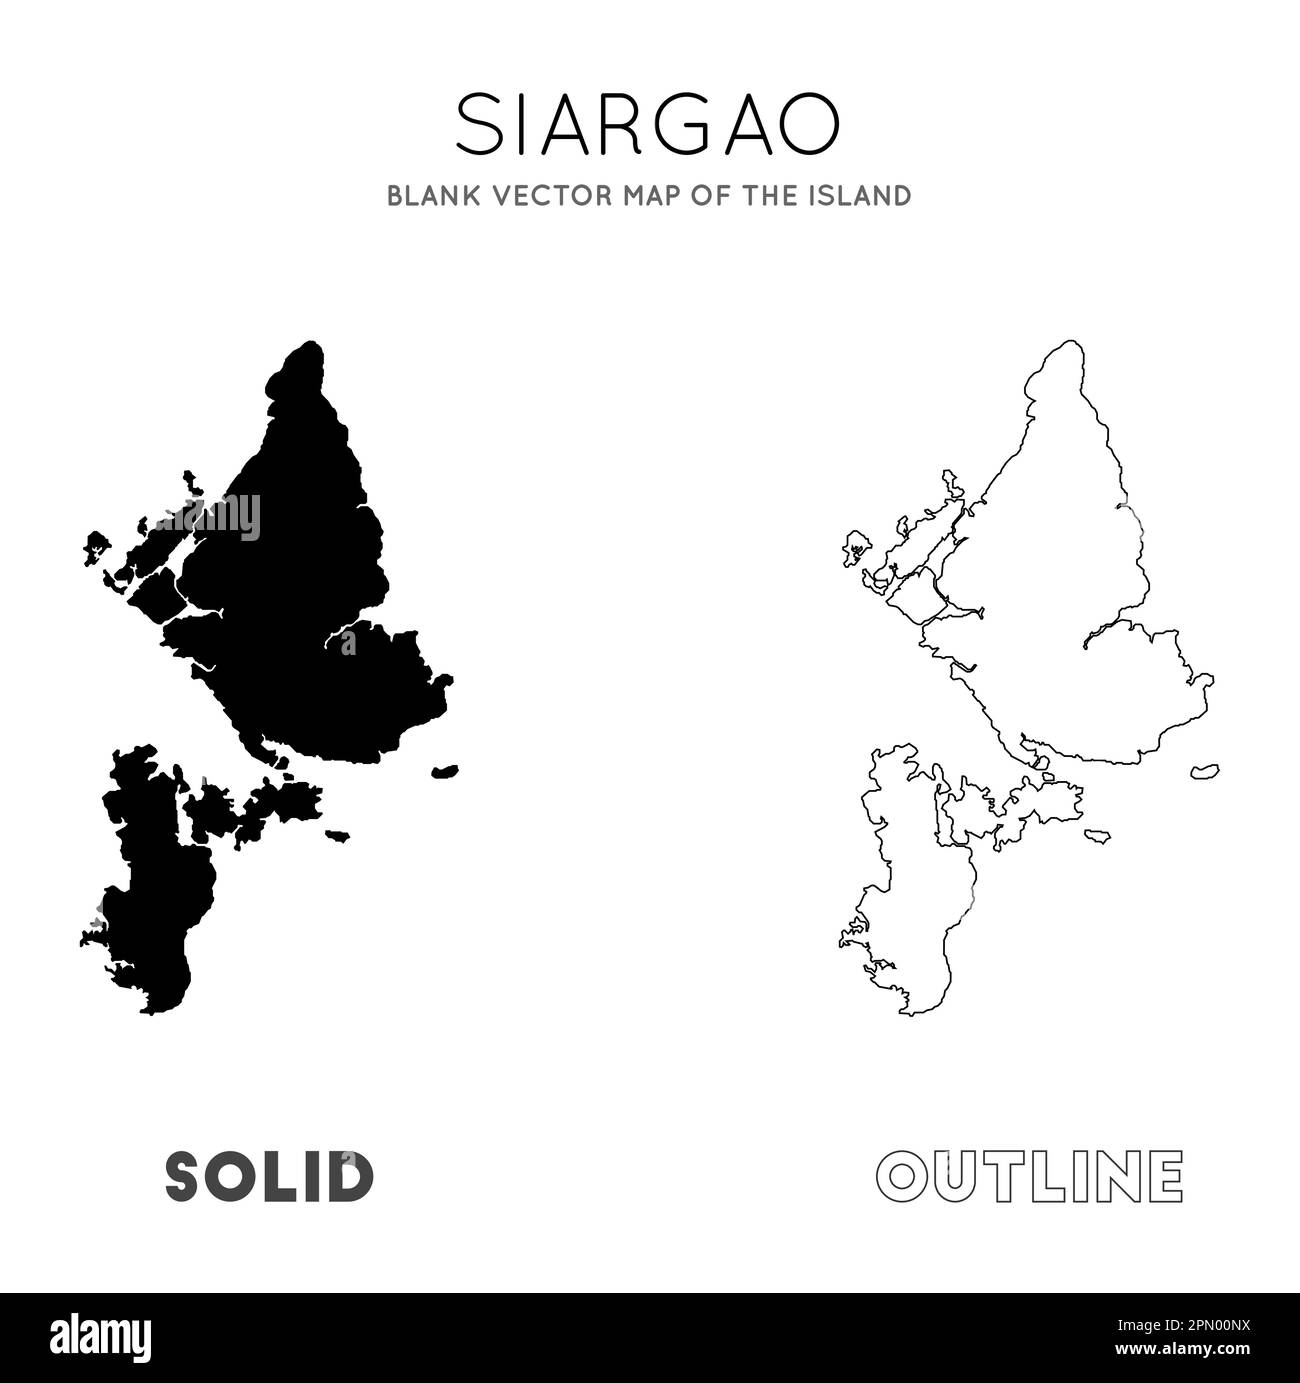 Siargao map. Blank vector map of the Island. Borders of Siargao for your infographic. Vector illustration. Stock Vector